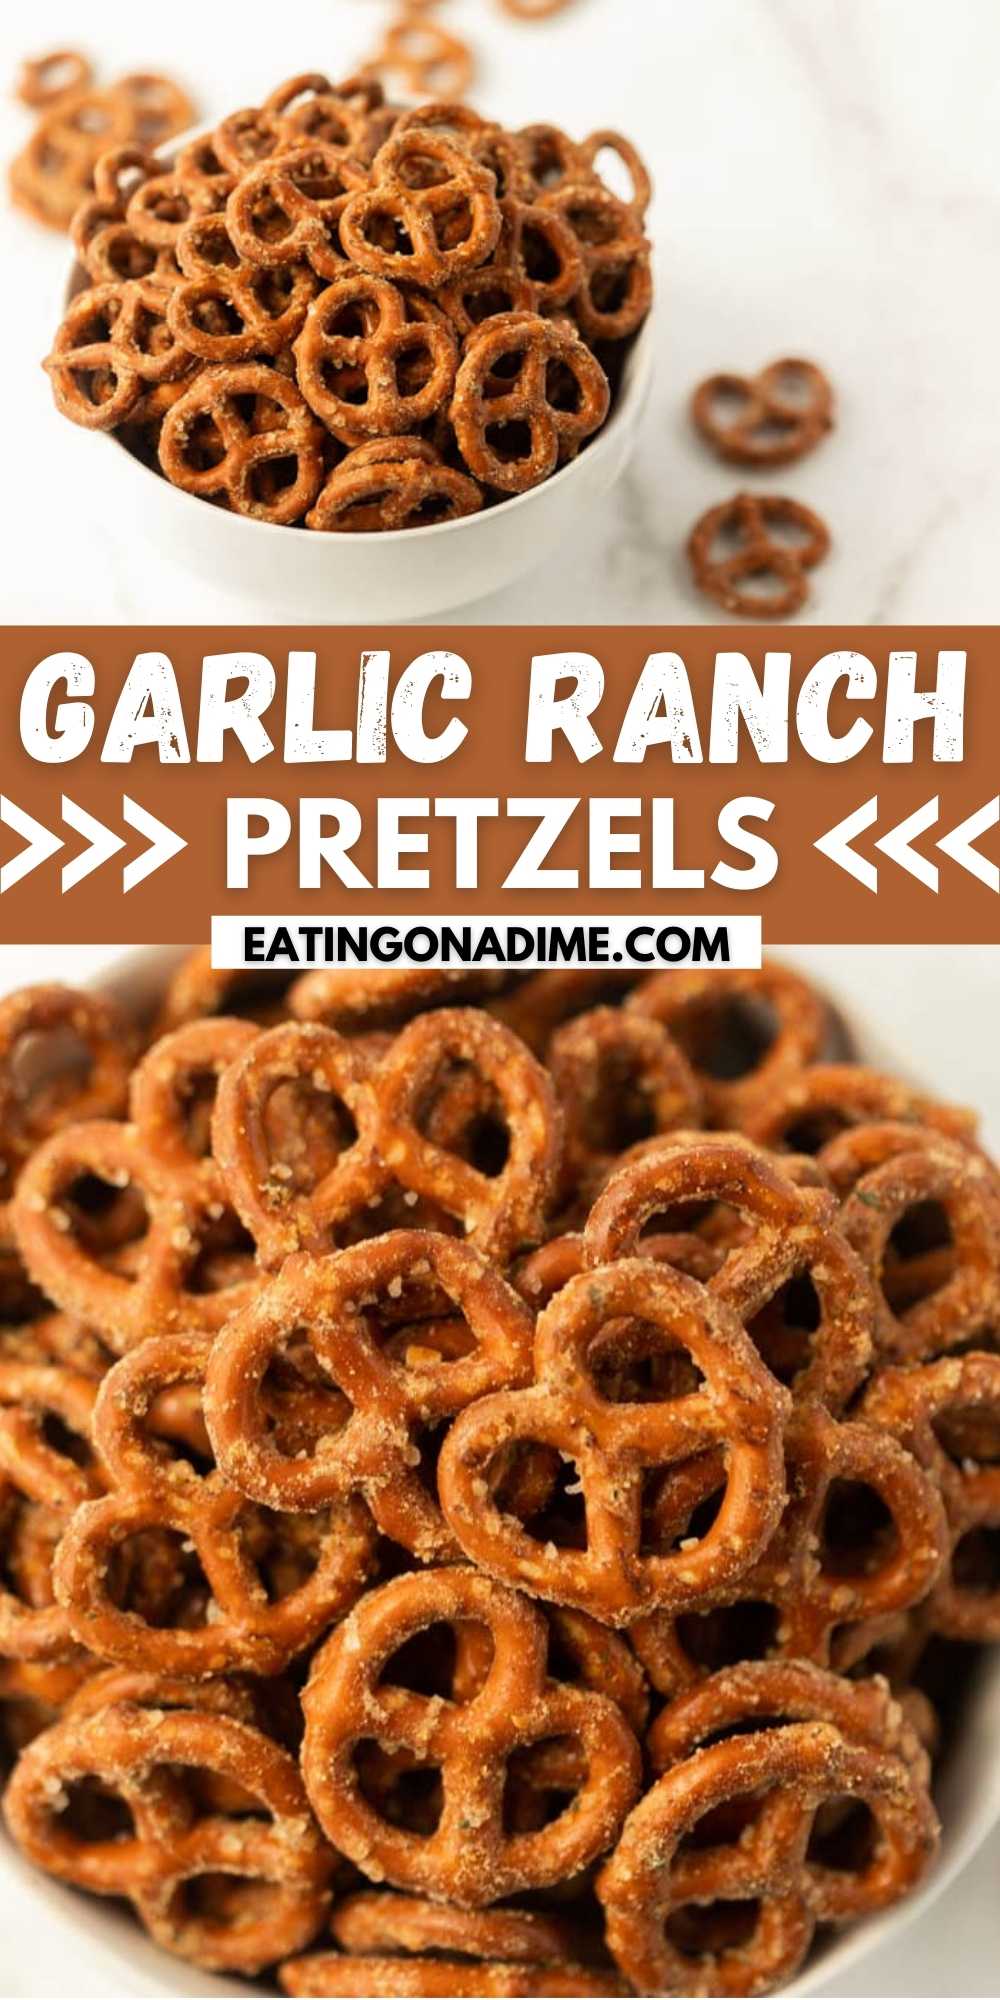 You'll love this Garlic Ranch Pretzel recipe. This quick recipe only requires 4 ingredients and is easy to make in oven. You can also make spicy ranch pretzels with this simple & easy recipe! This is the best appetizer recipe.  #eatingonadime #appetizerrecipes #pretzelrecipes #snackrecipes 
